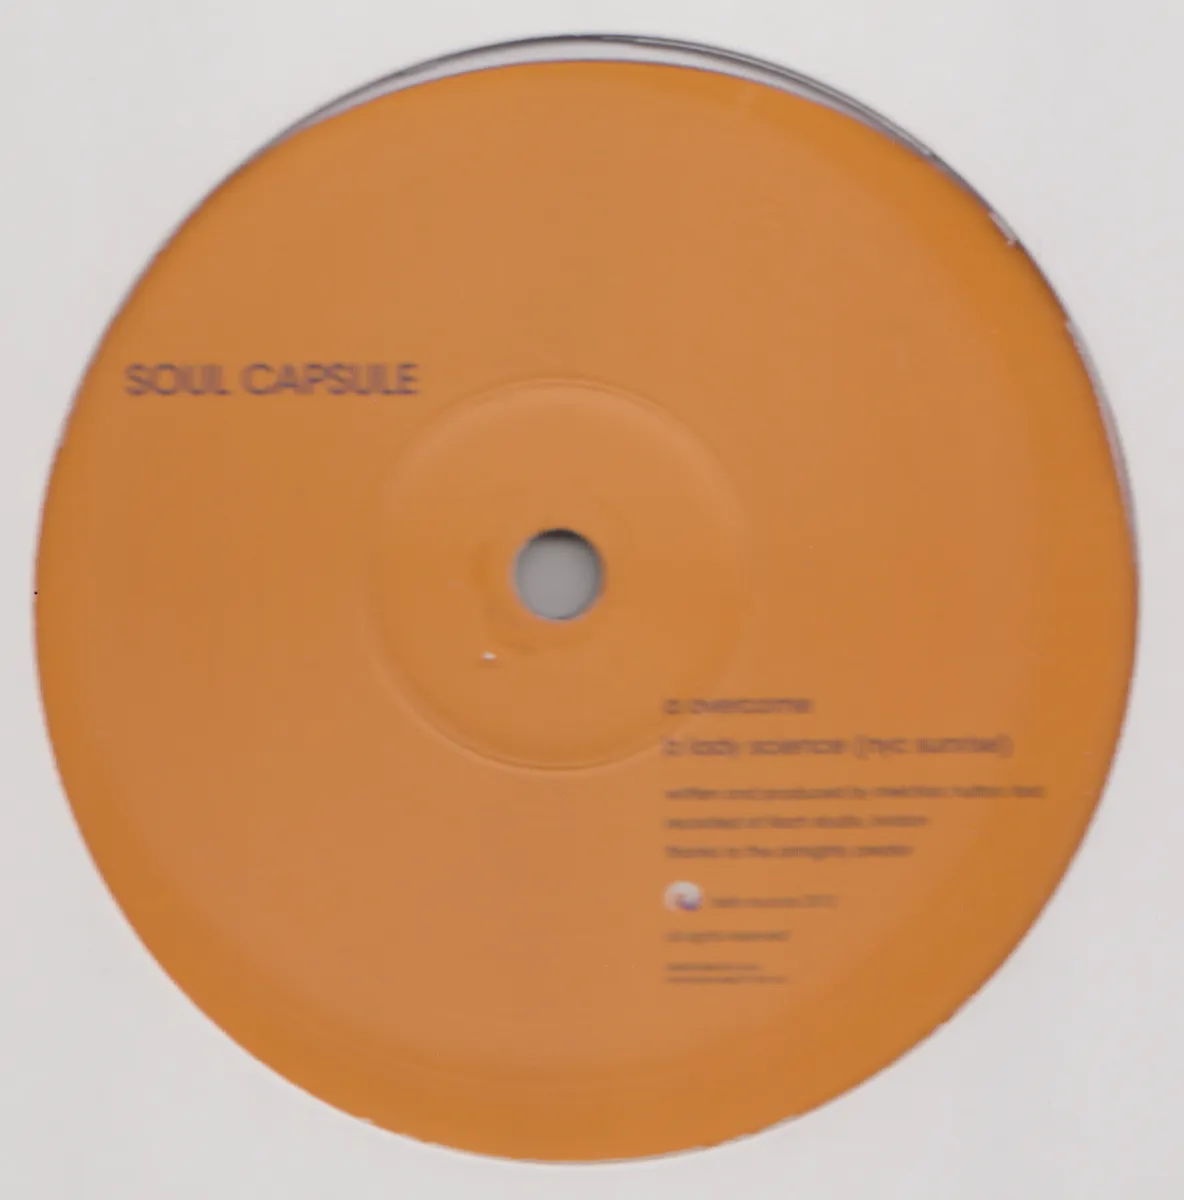 Soul Capsule - Overcome / Lady Science (NYC Sunrise) : 12inch